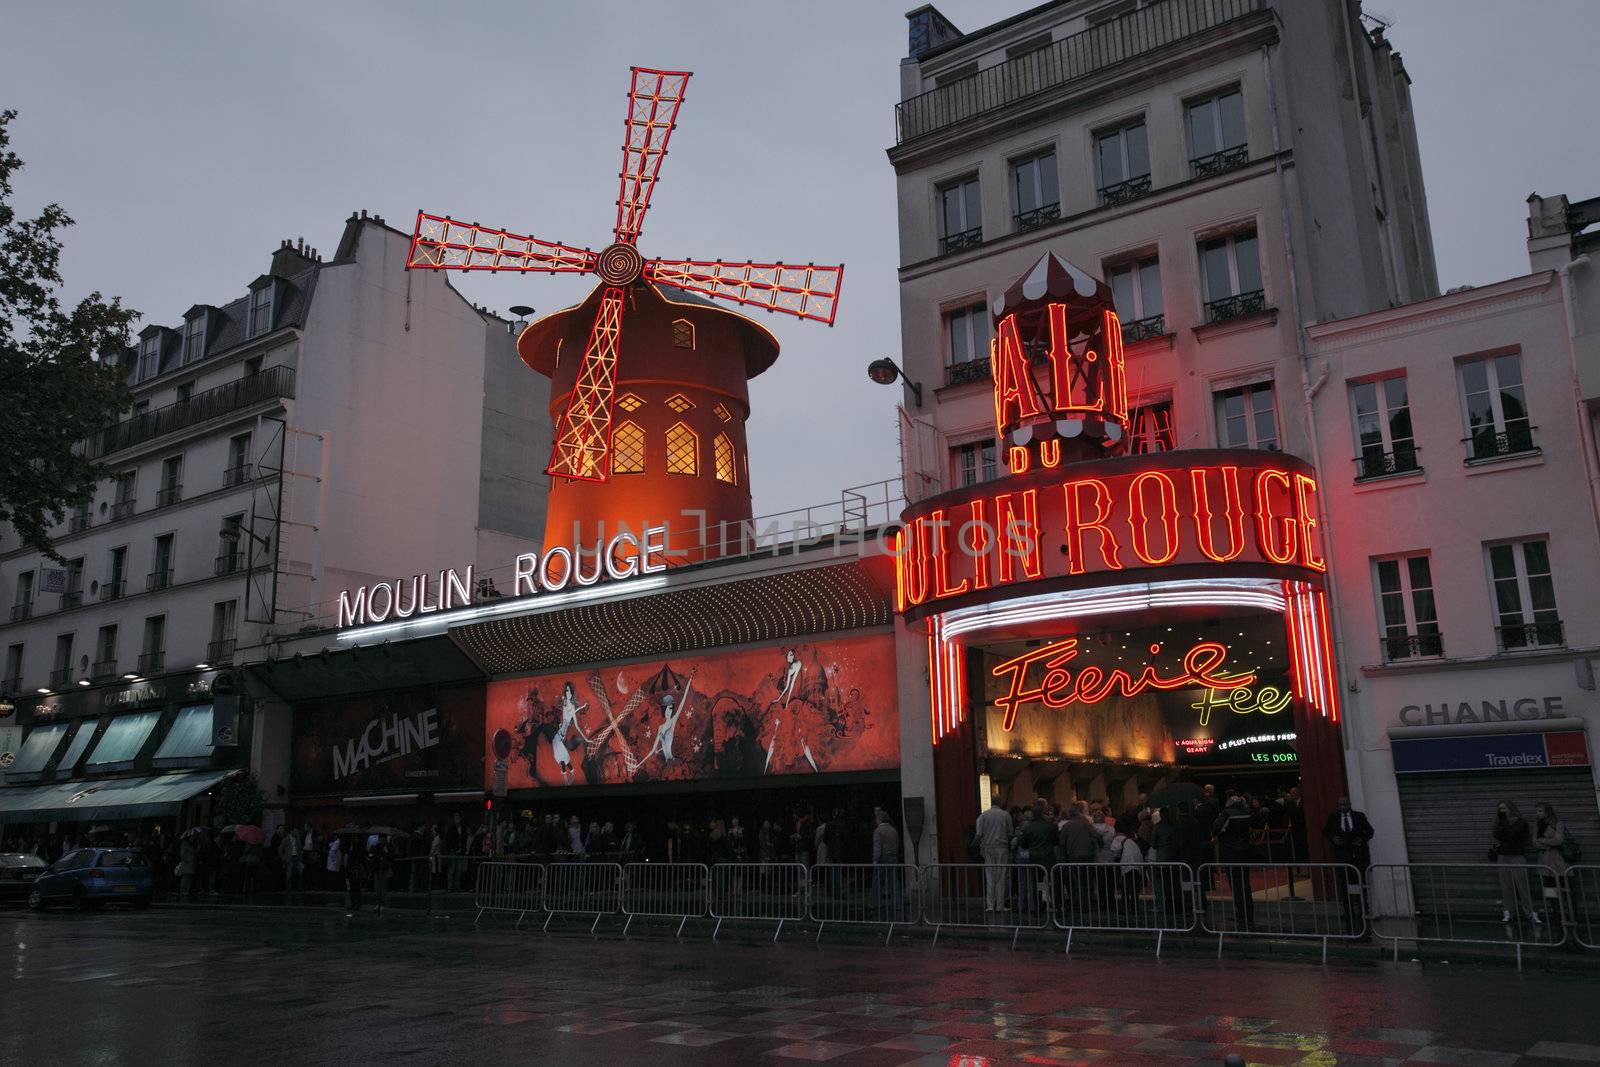 PARIS, FRANCE - MAY 17: Exterior of famous nightclub Moulin Rouge May 17, 2010 in Paris, France